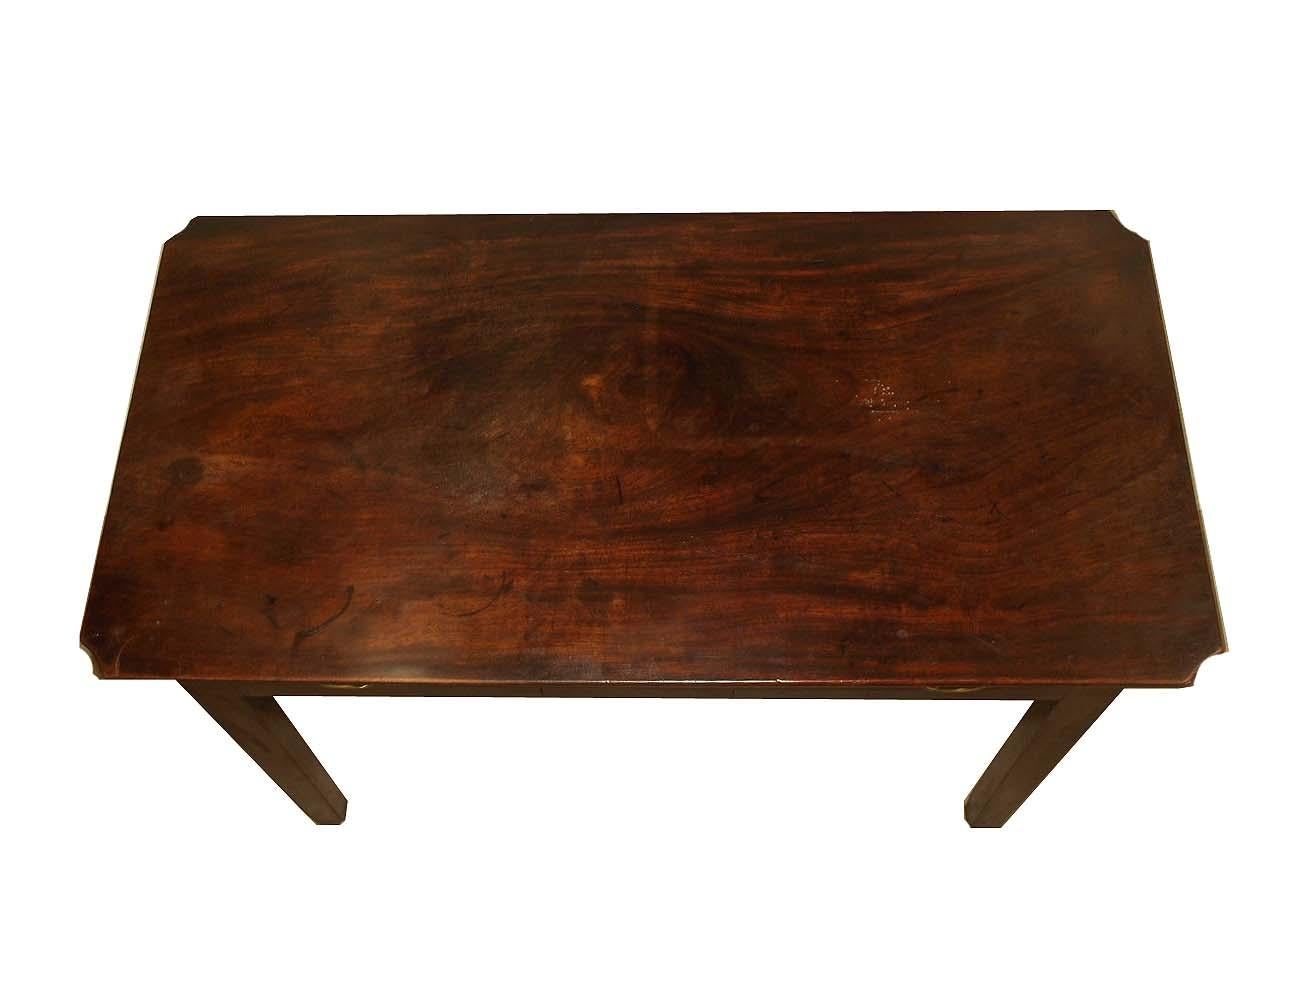 English mahogany one drawer table, the top with figured grain and beautiful patina(minor stains), the corners have a concave shape. The drawer appears to have its original fretwork pulls and escutcheon, oak secondary wood; tapered legs.